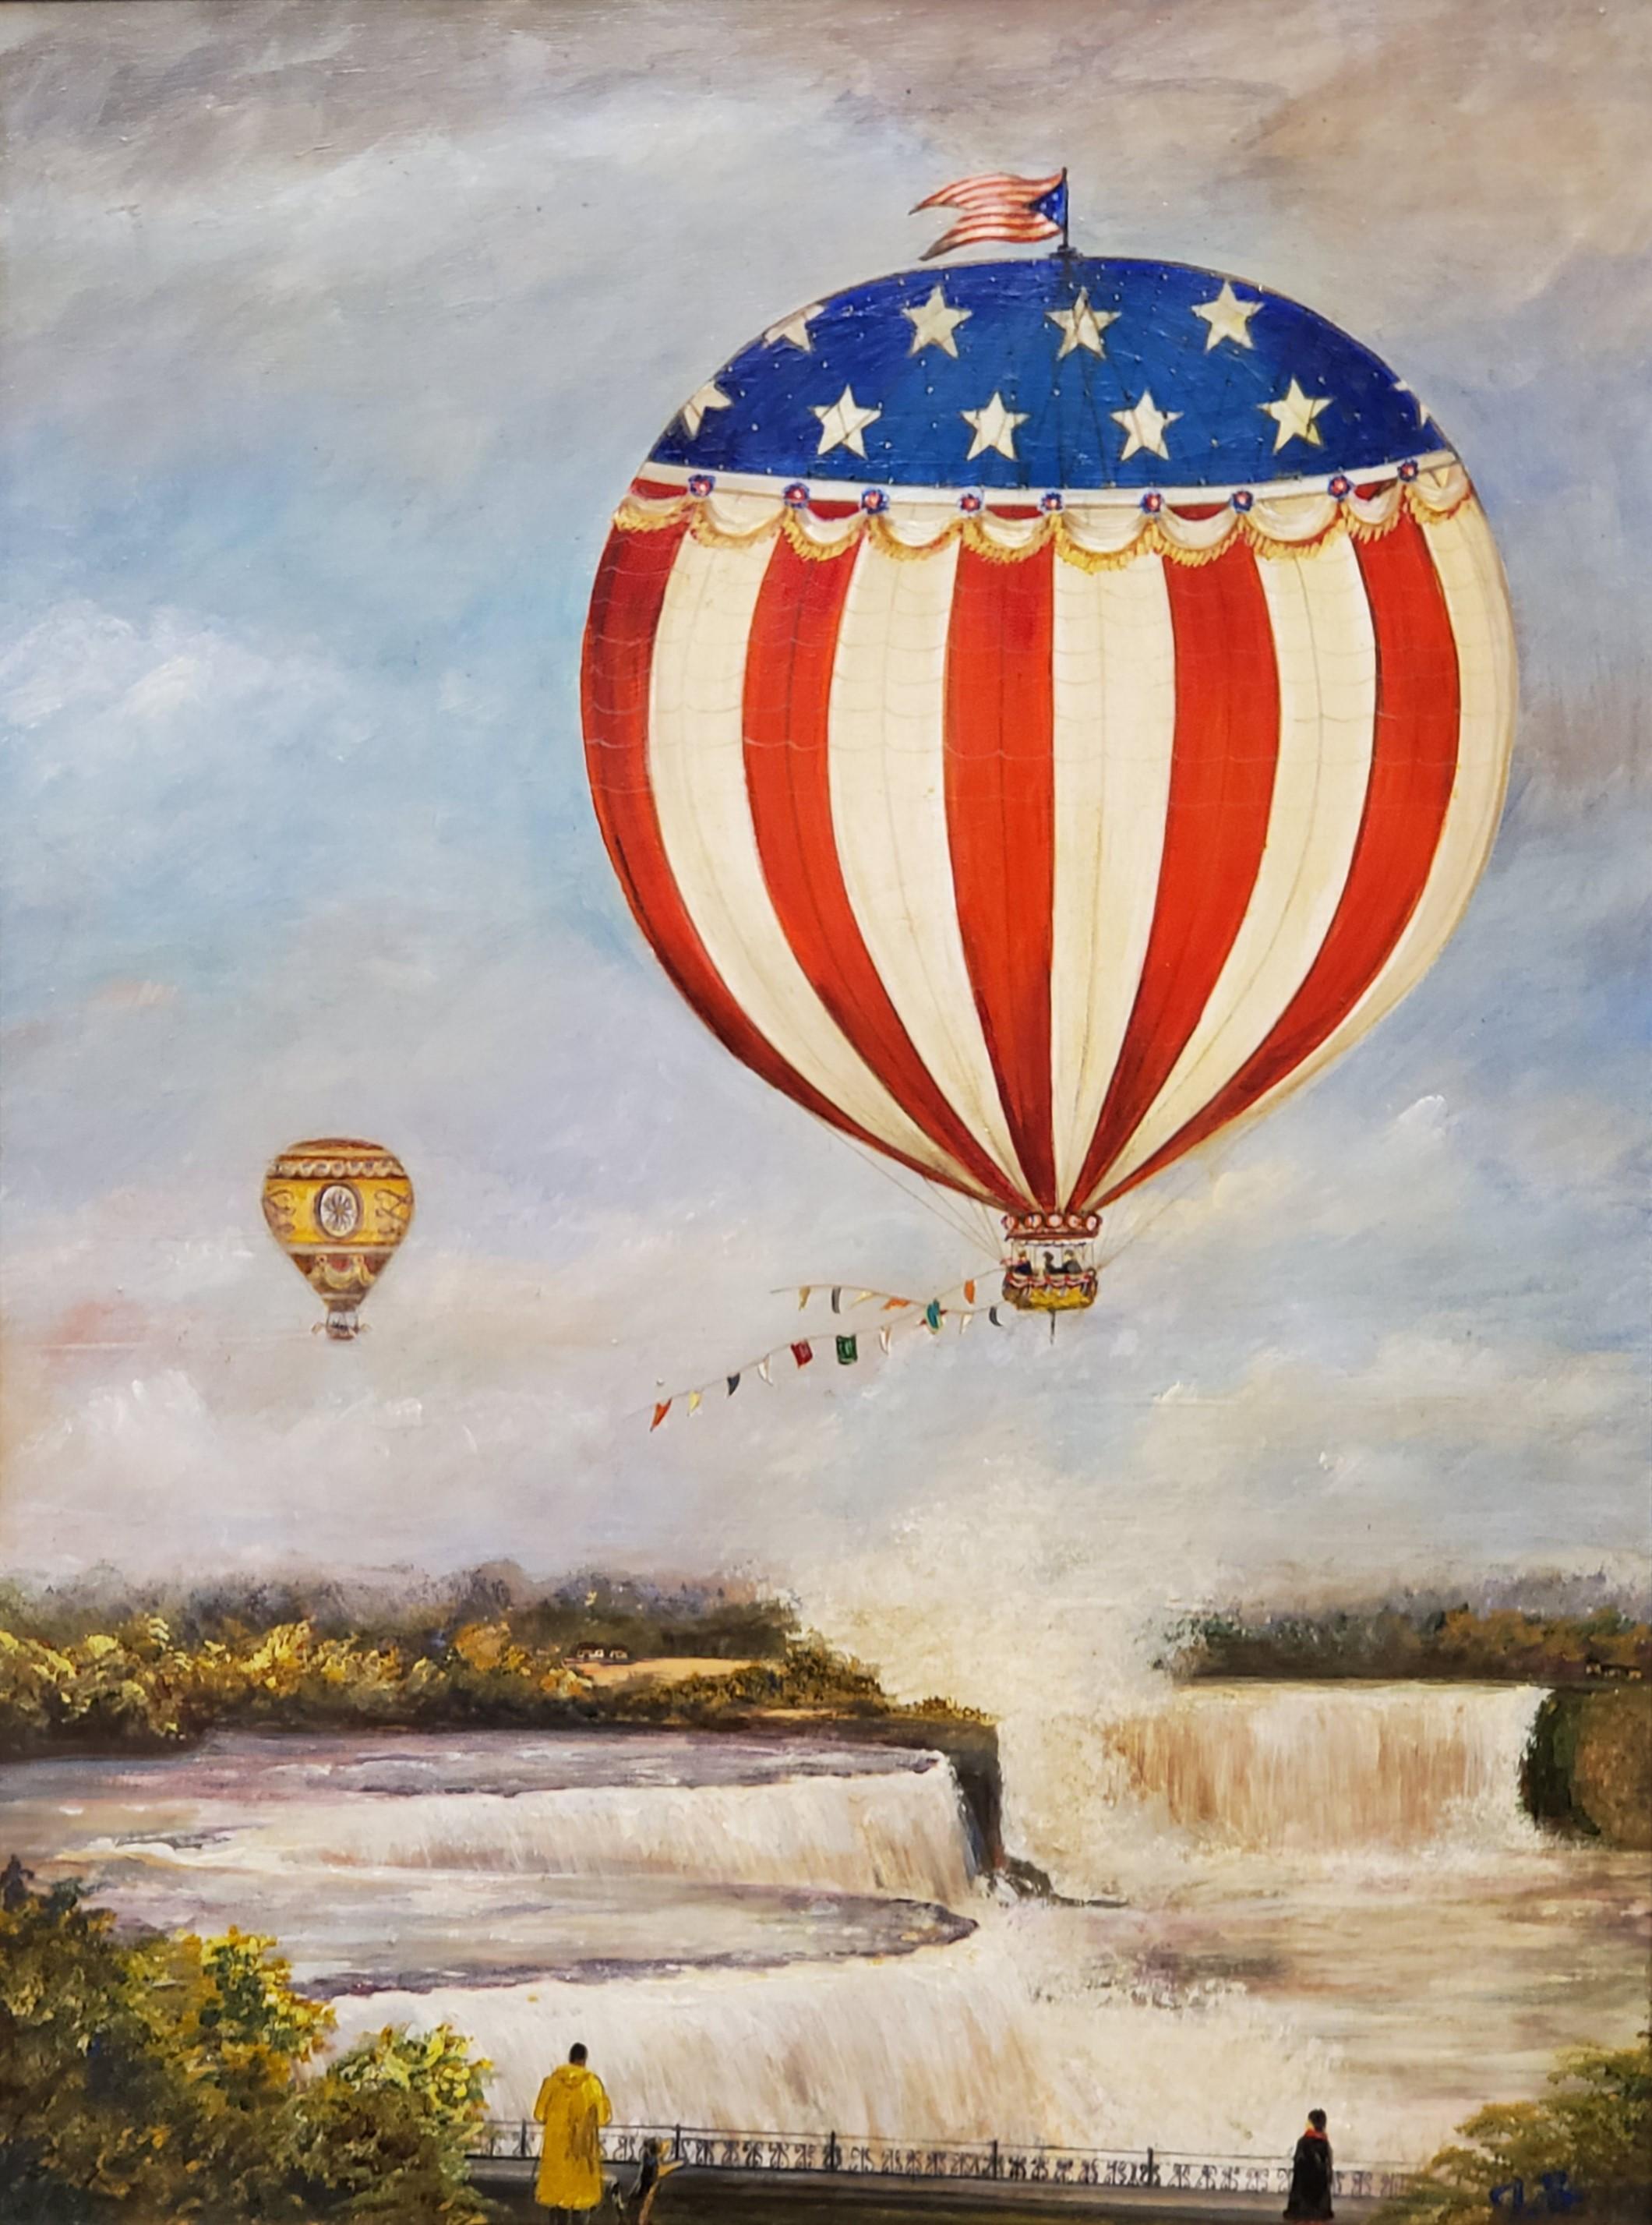 Hot Air Balloon over Niagra Falls - Painting by Unknown